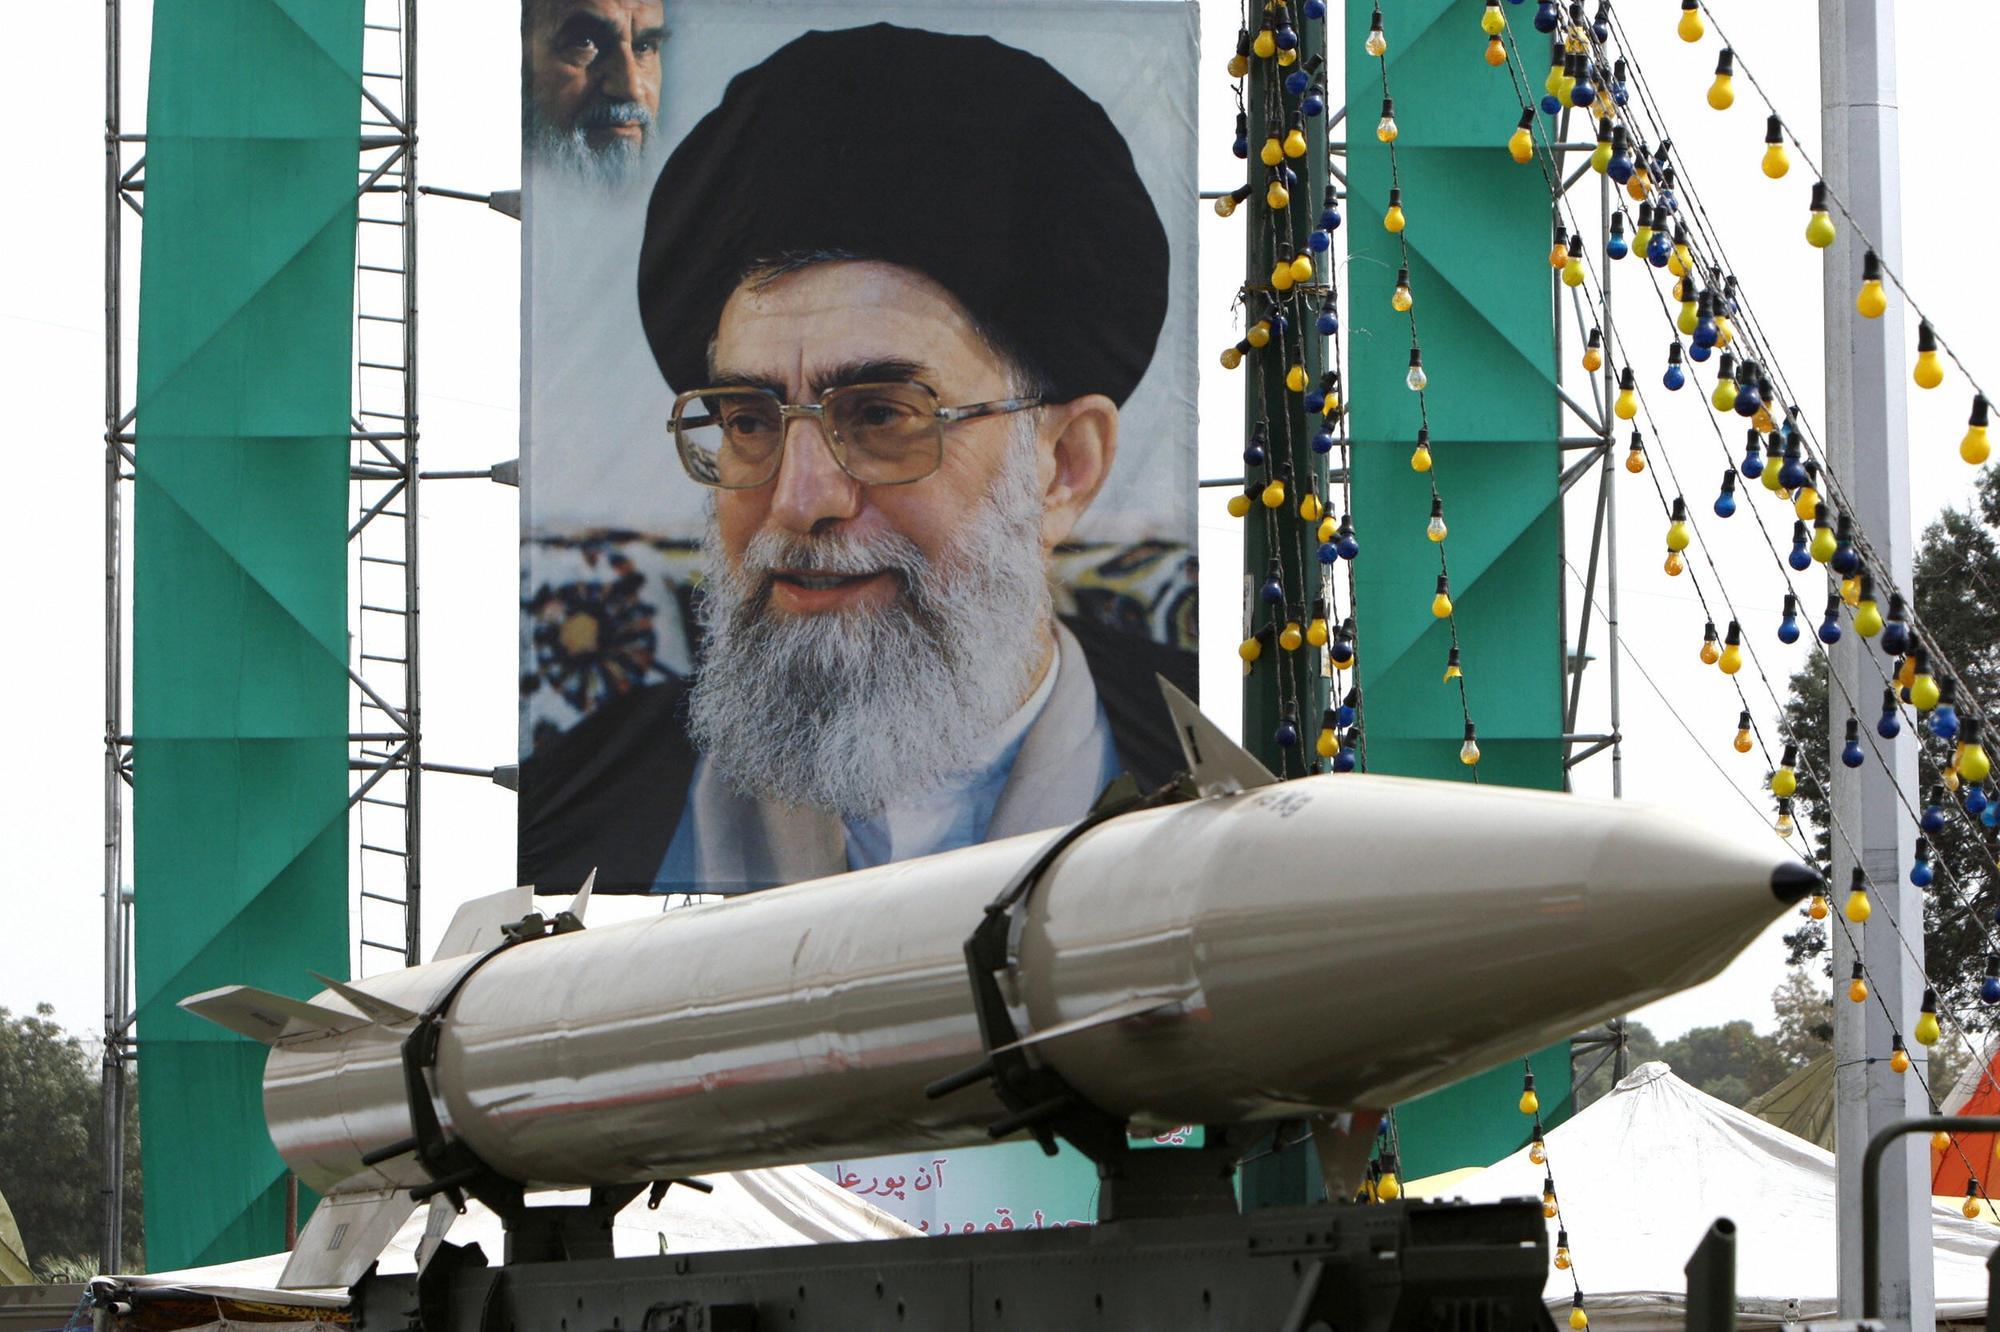 Iran nuclear threat: After Ayatollah's son reveals regime was secretly trying to build a nuclear bomb, West must now support democratic opposition – Struan Stevenson